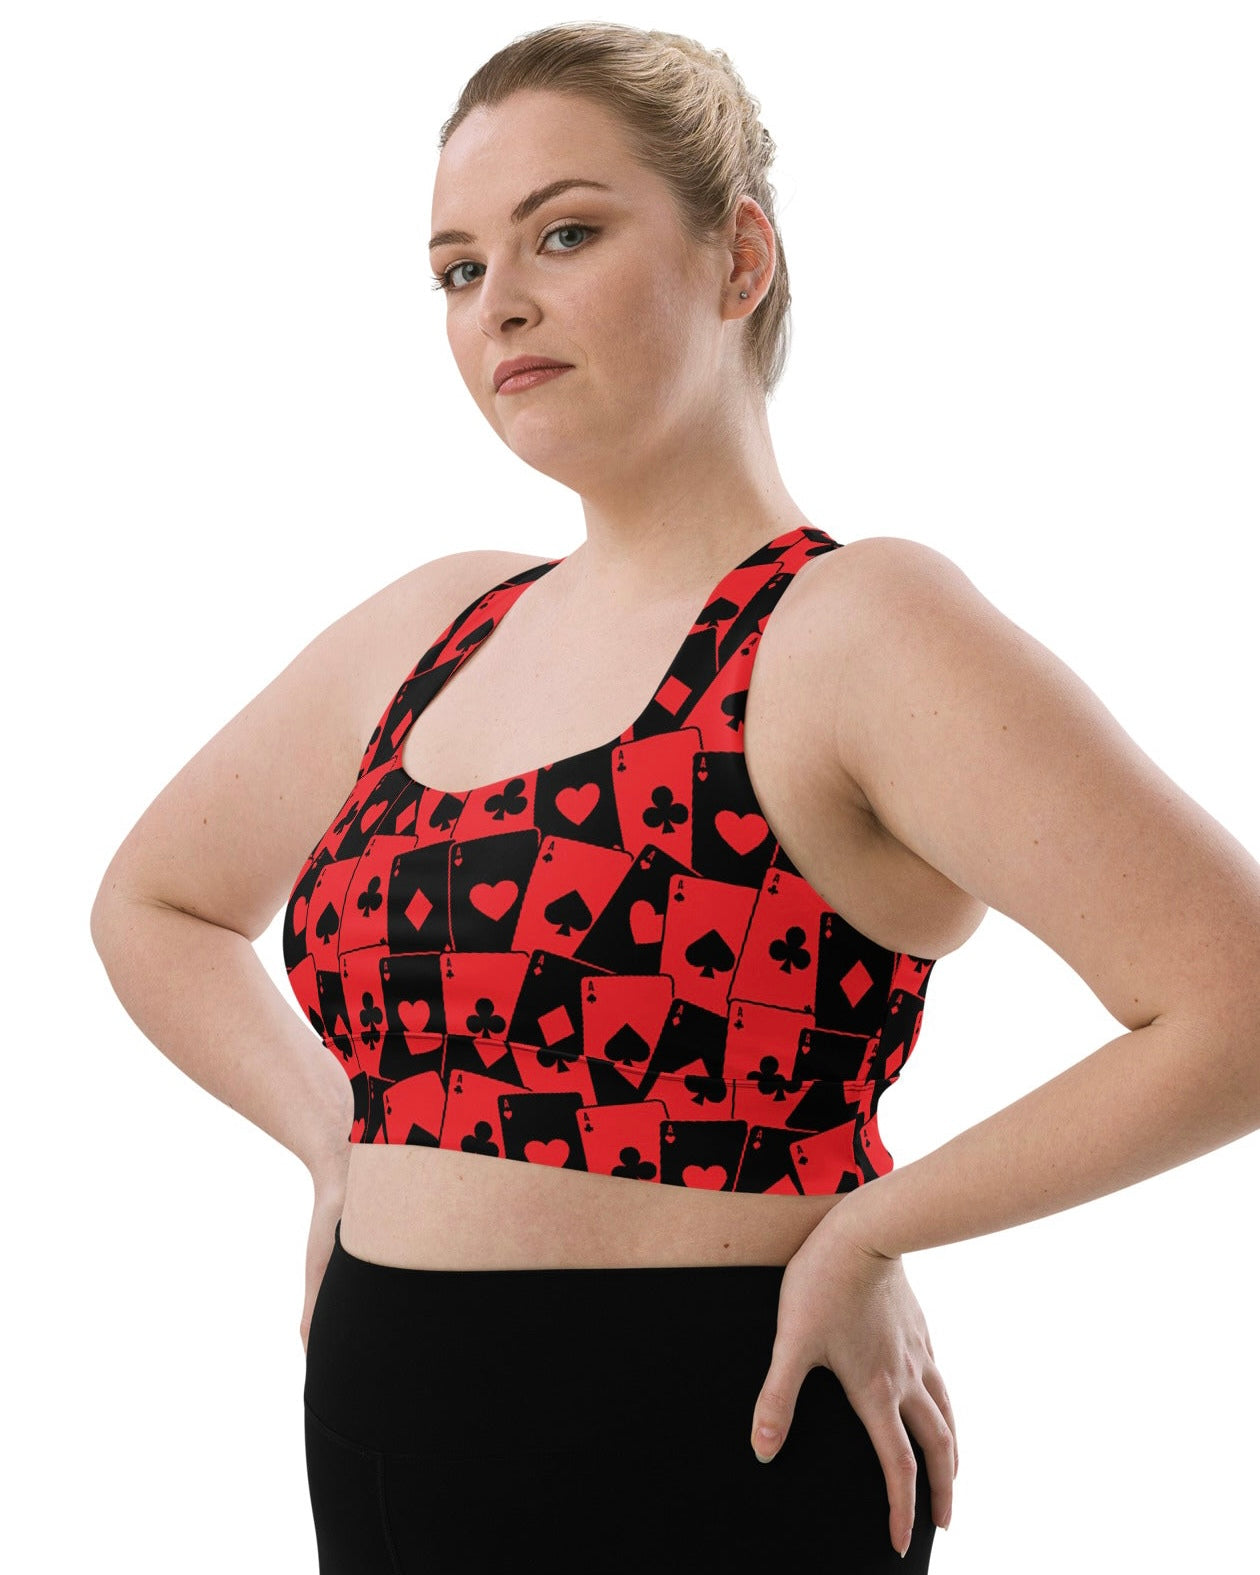 Ace Of Hearts Longline Top, Sports Top, - One Stop Rave